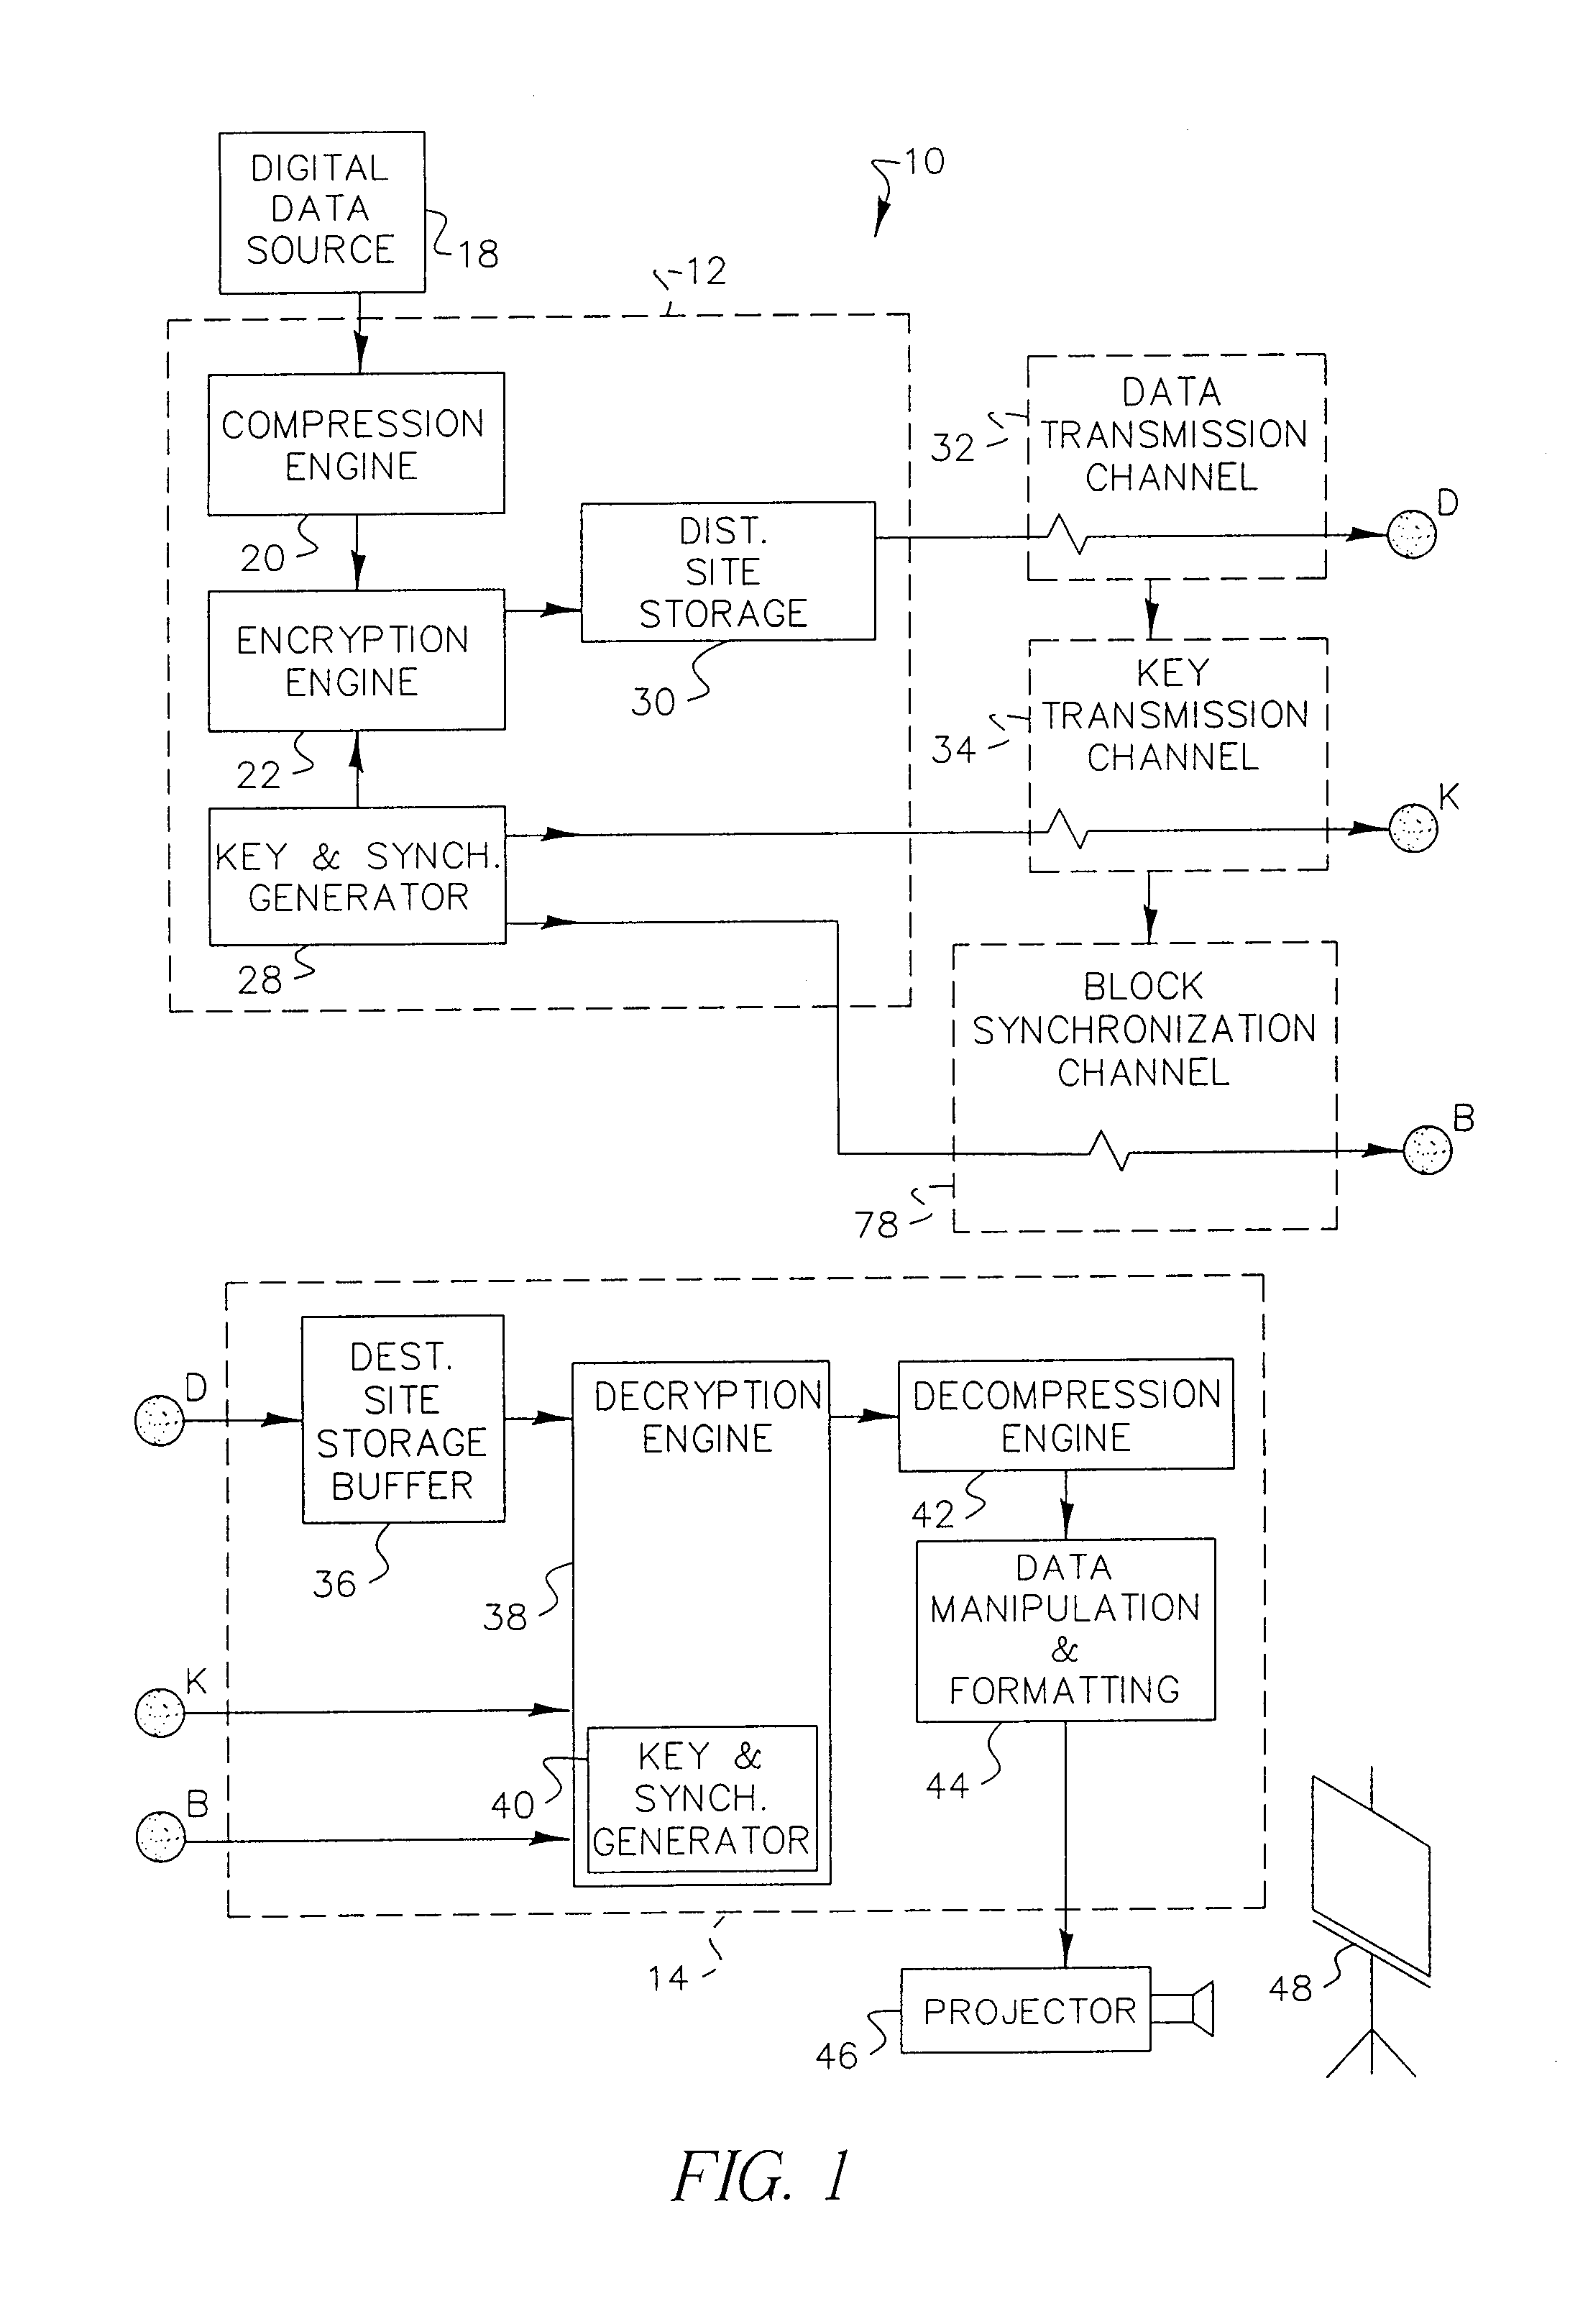 Encryption apparatus and method for synchronizing multiple encryption keys with a data stream